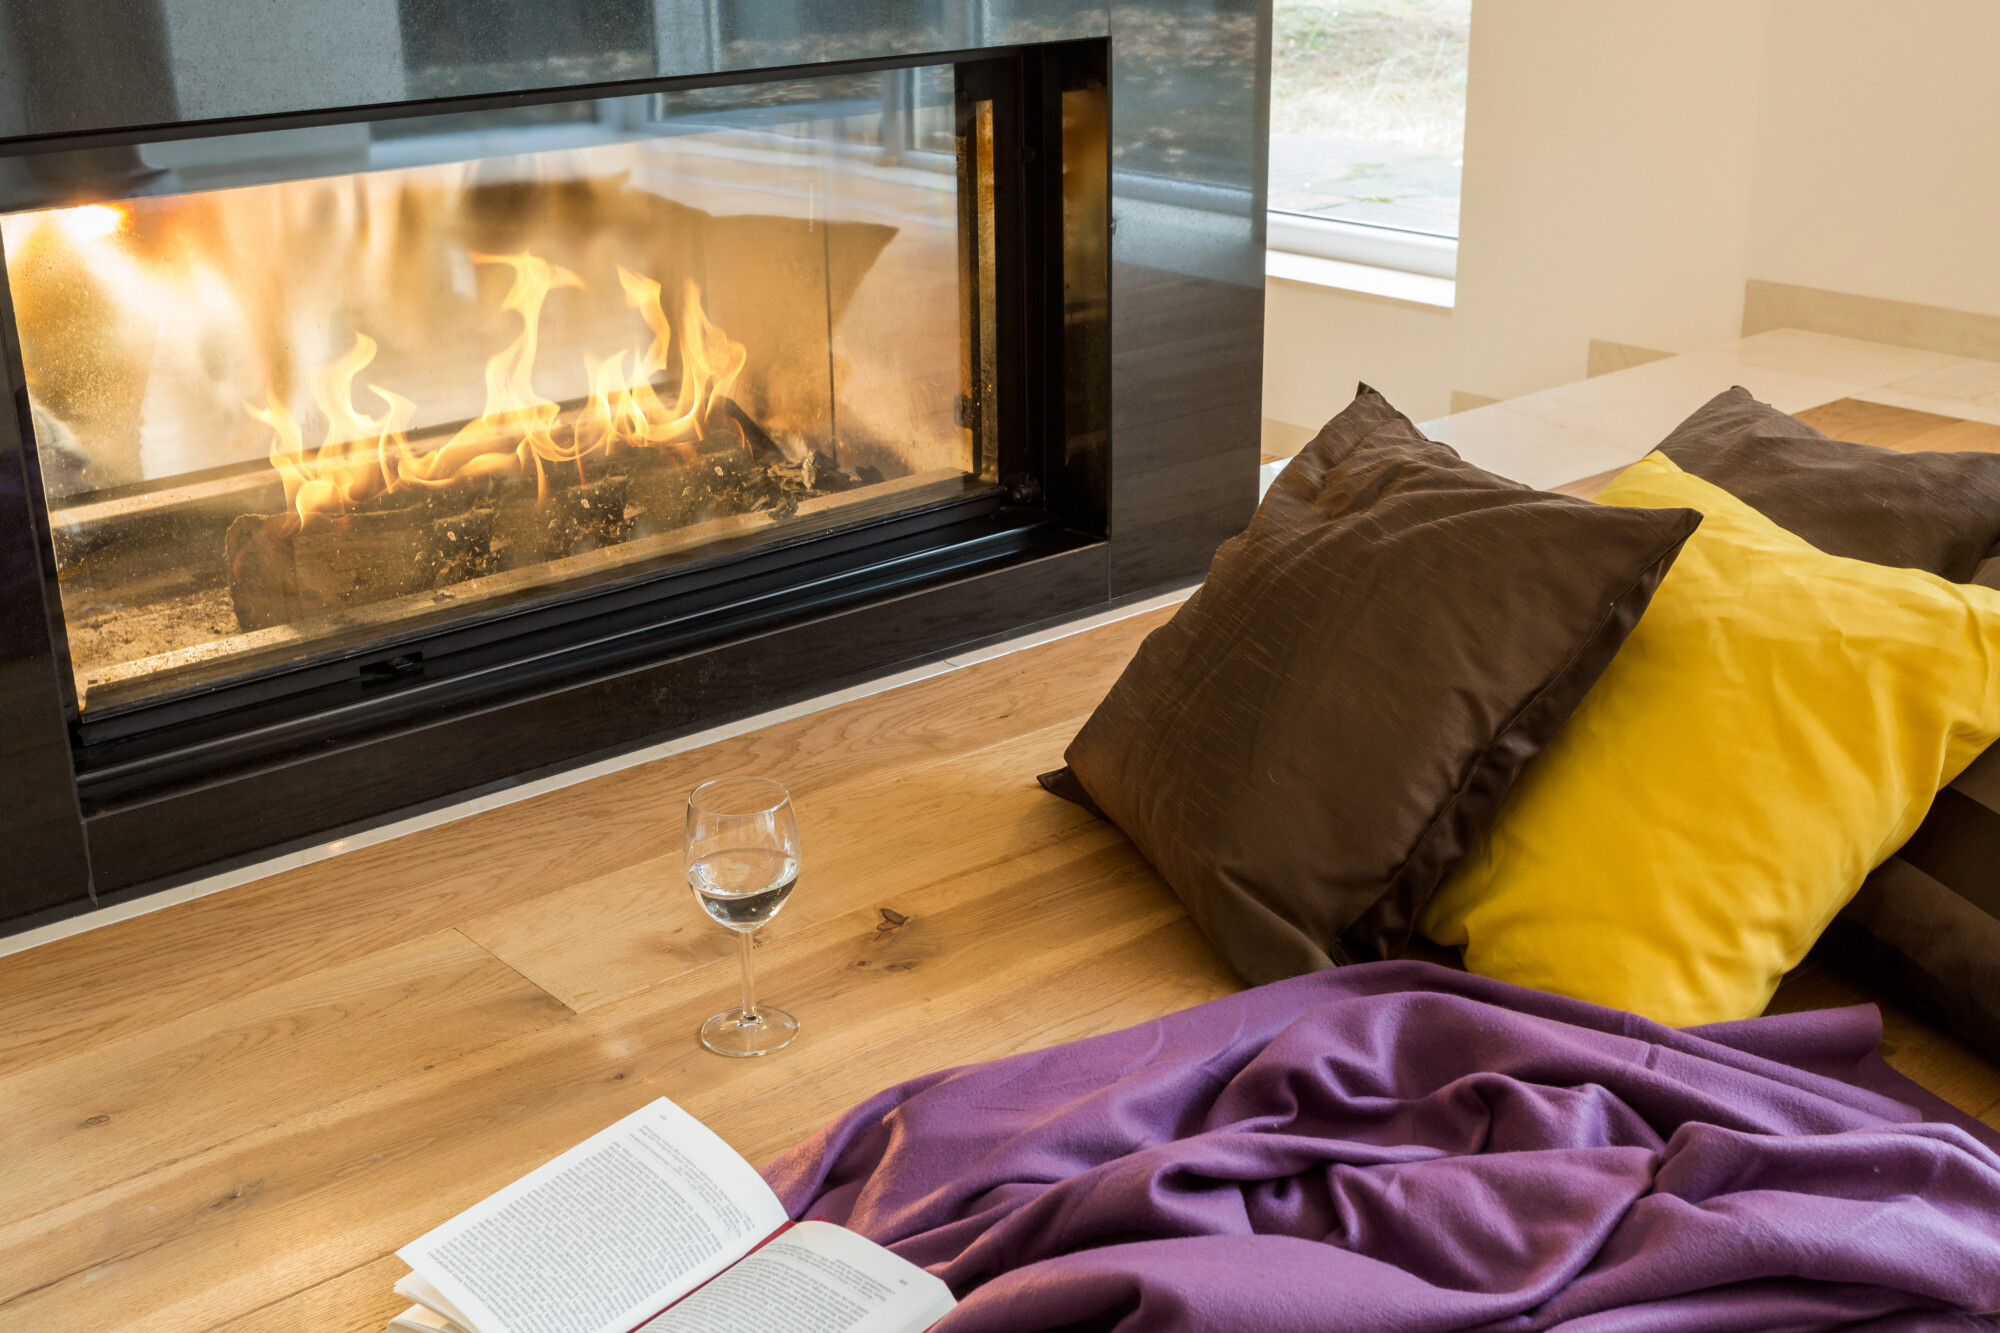 Fireplaces spruce up any living space, but which fireplace colors can you choose from? Which will fit your home's theme? Learn here.